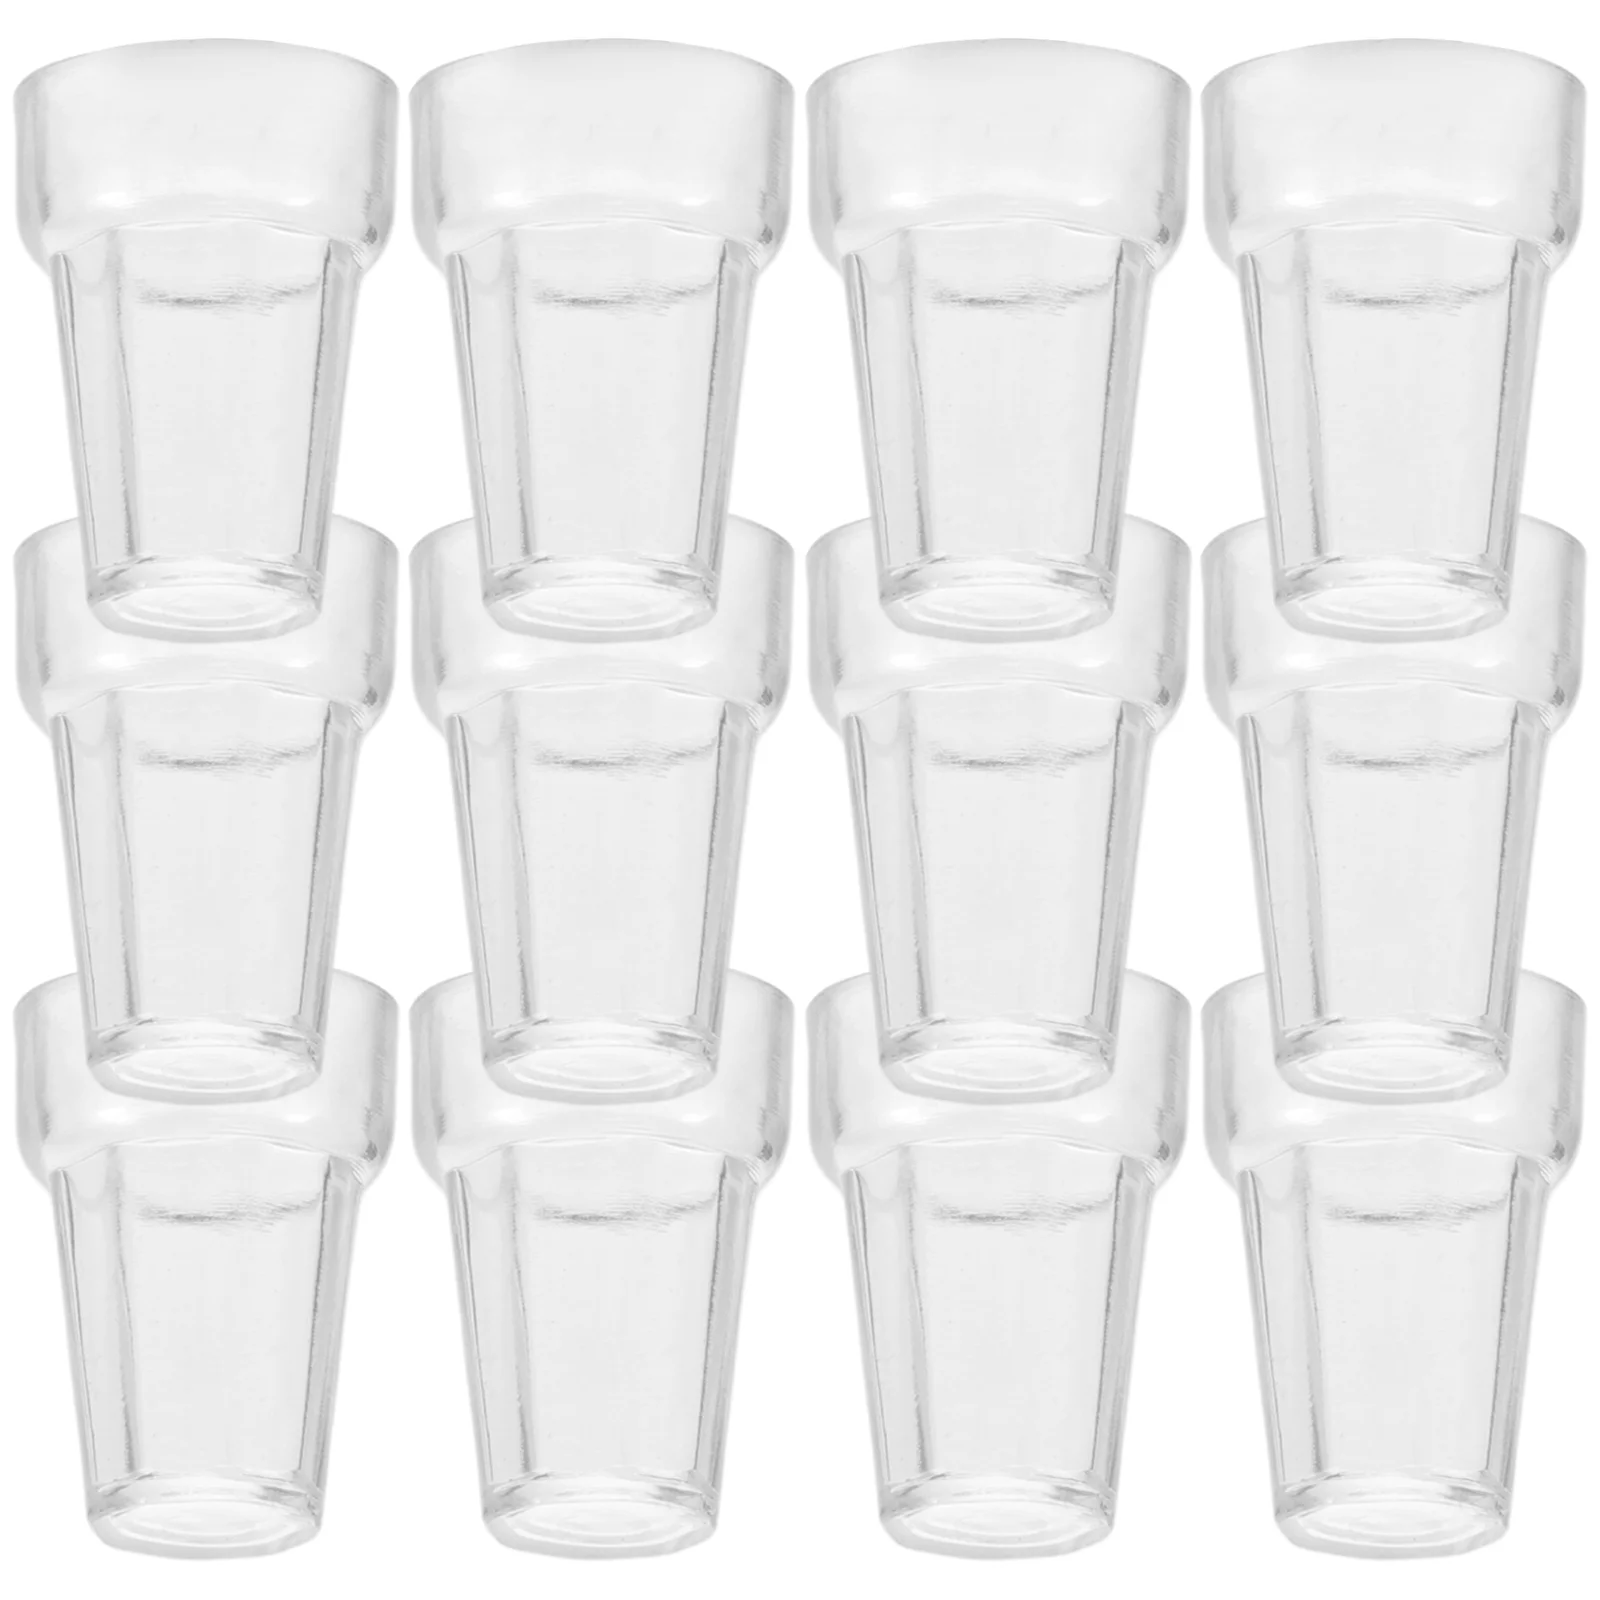 12 Pcs Tiny Water Cups Slushie Mini Children’s Toys Ice Cream Models House Drinking Glasses Decorative Miniature Items replacement water filter for ap317 [1 pack] water filter hydrogen water generator distiller water purifier for drinking polyflou